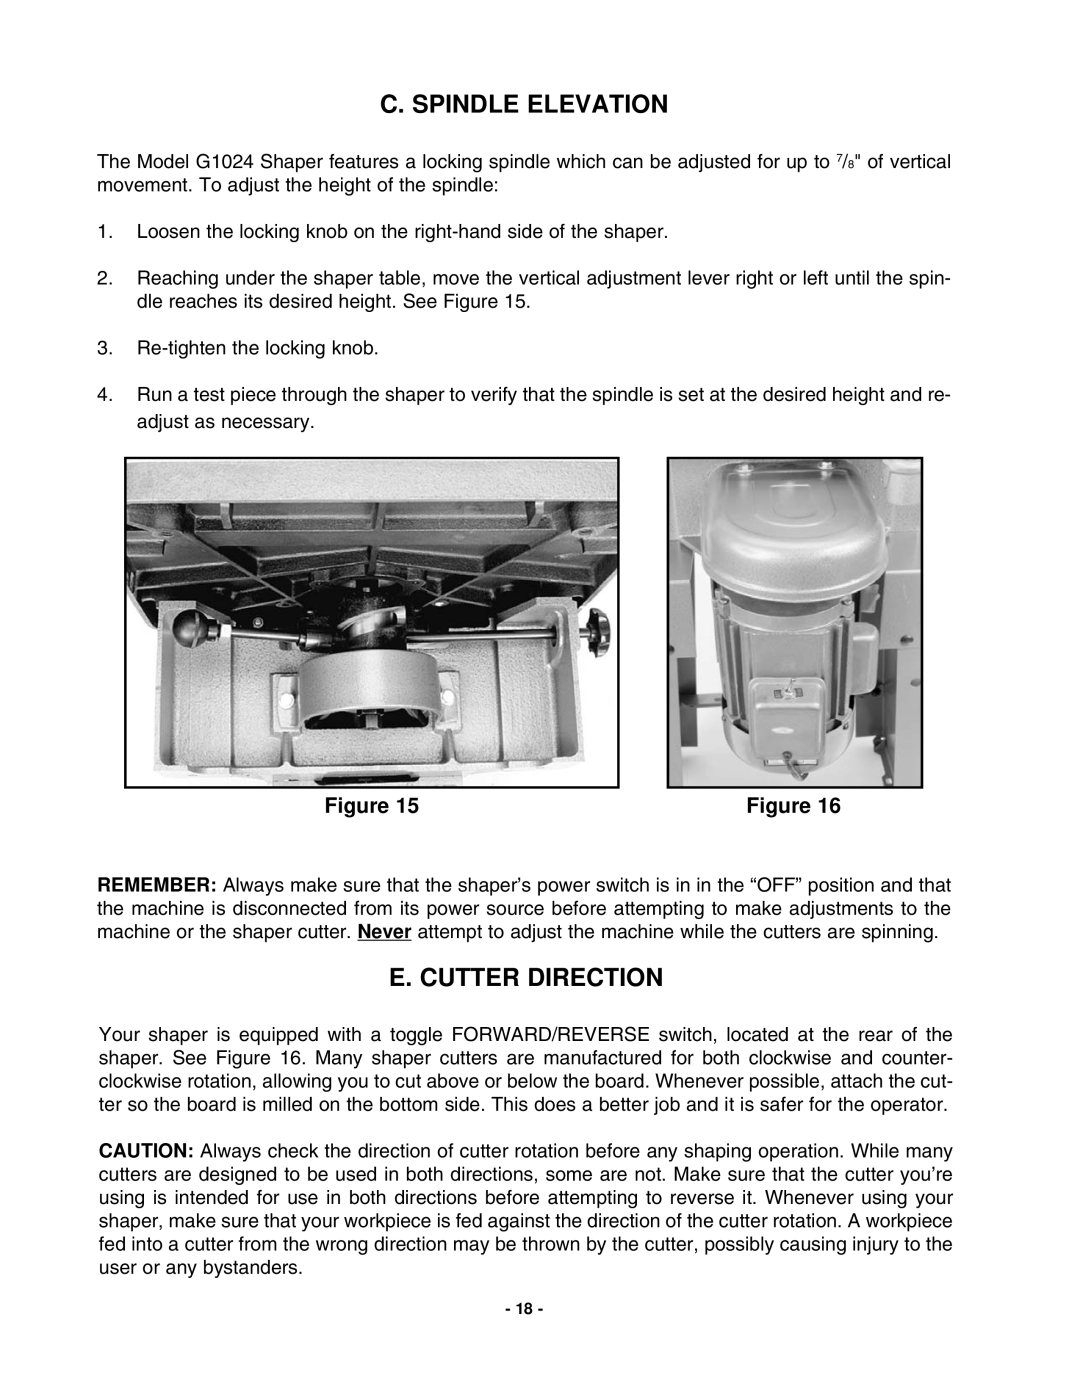 Grizzly G1024 instruction manual C. Spindle Elevation, E. Cutter Direction 